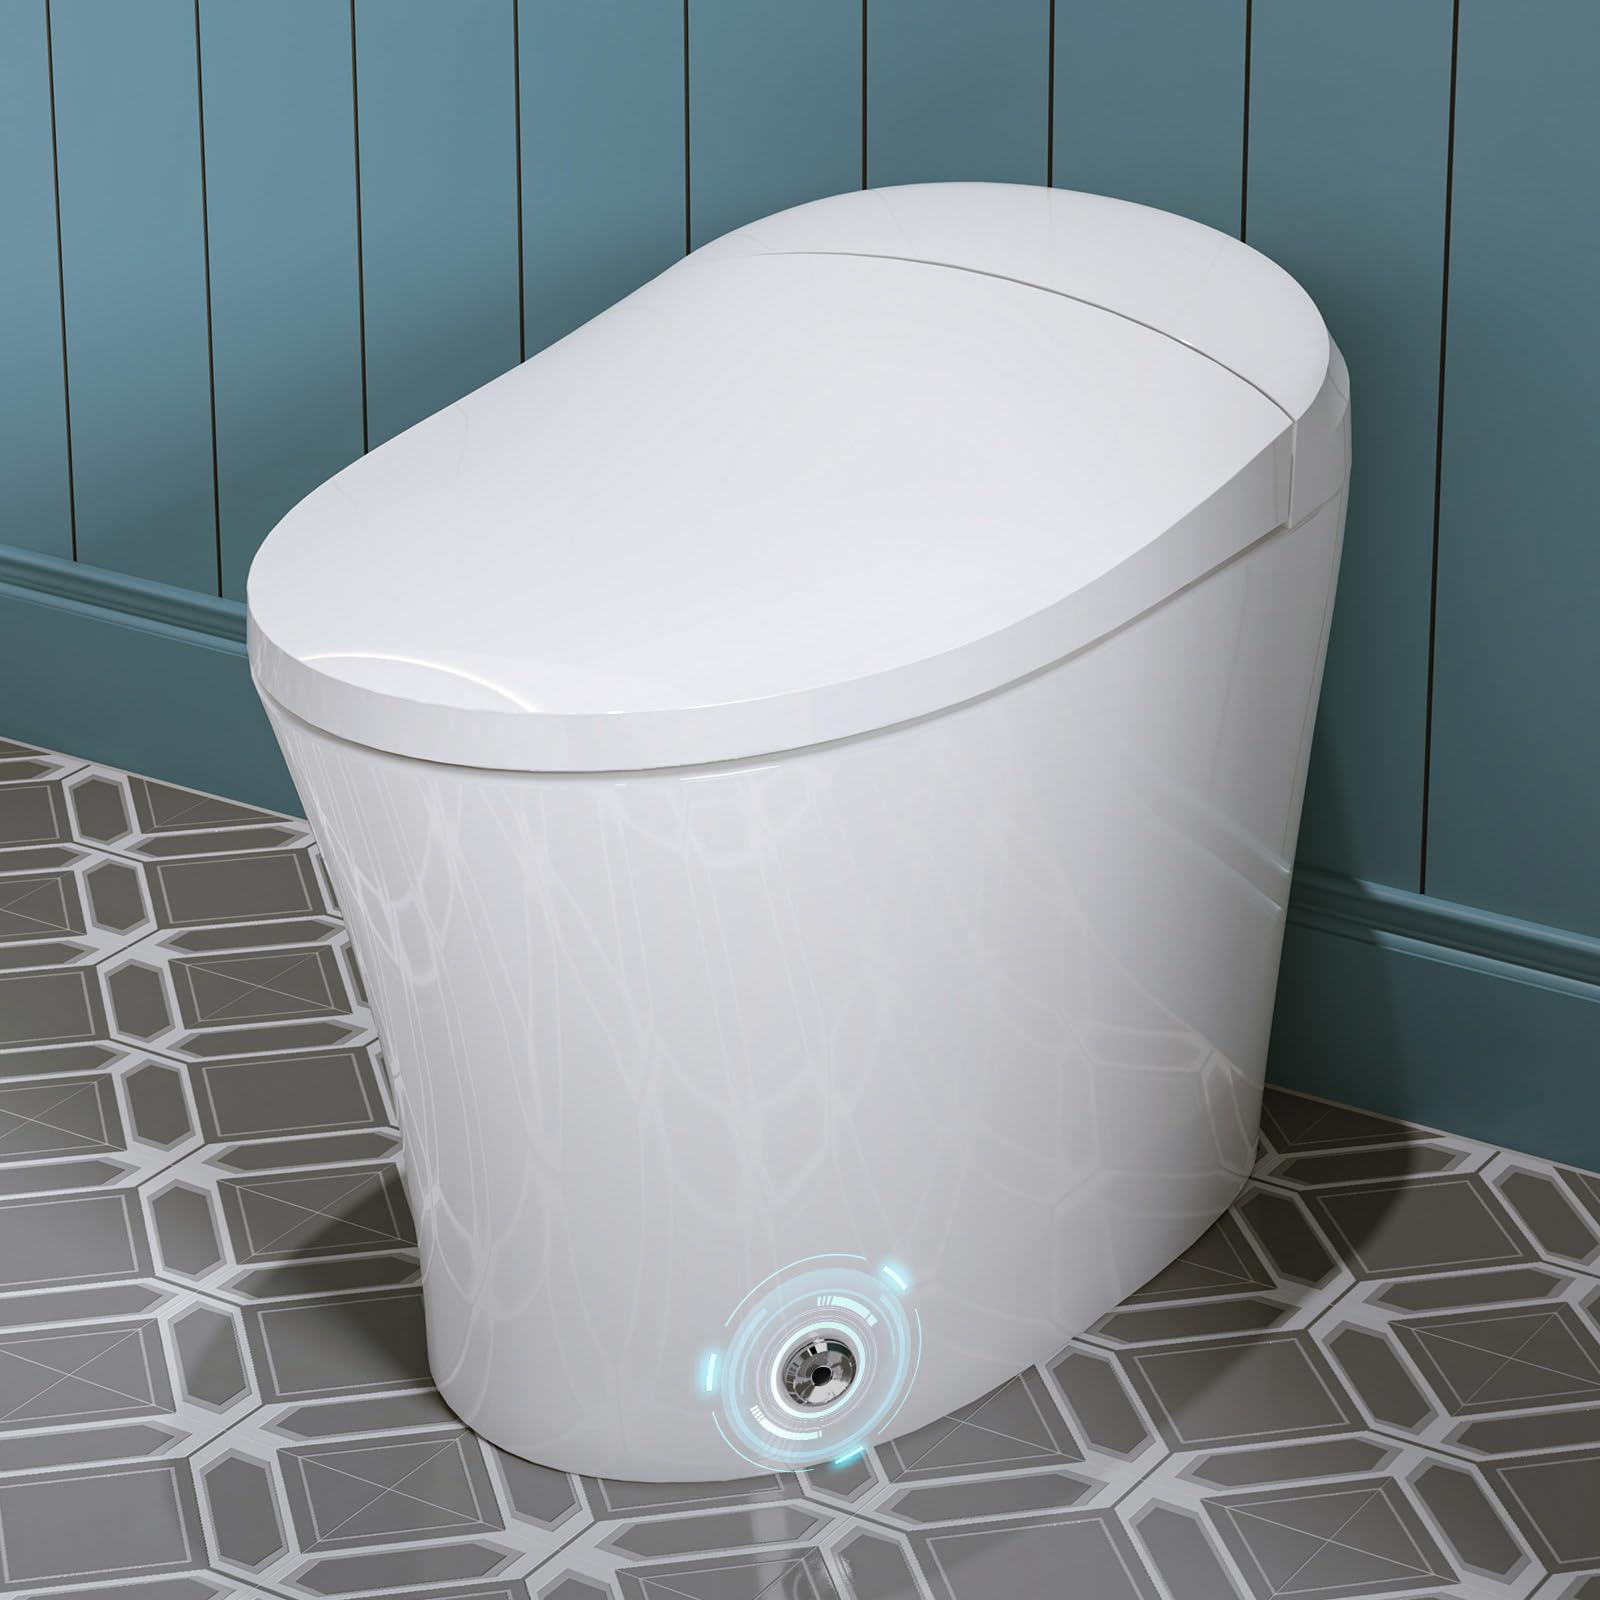 HOROW Tankless Toilet Bidet Combo with Self-Cleaning Nozzle